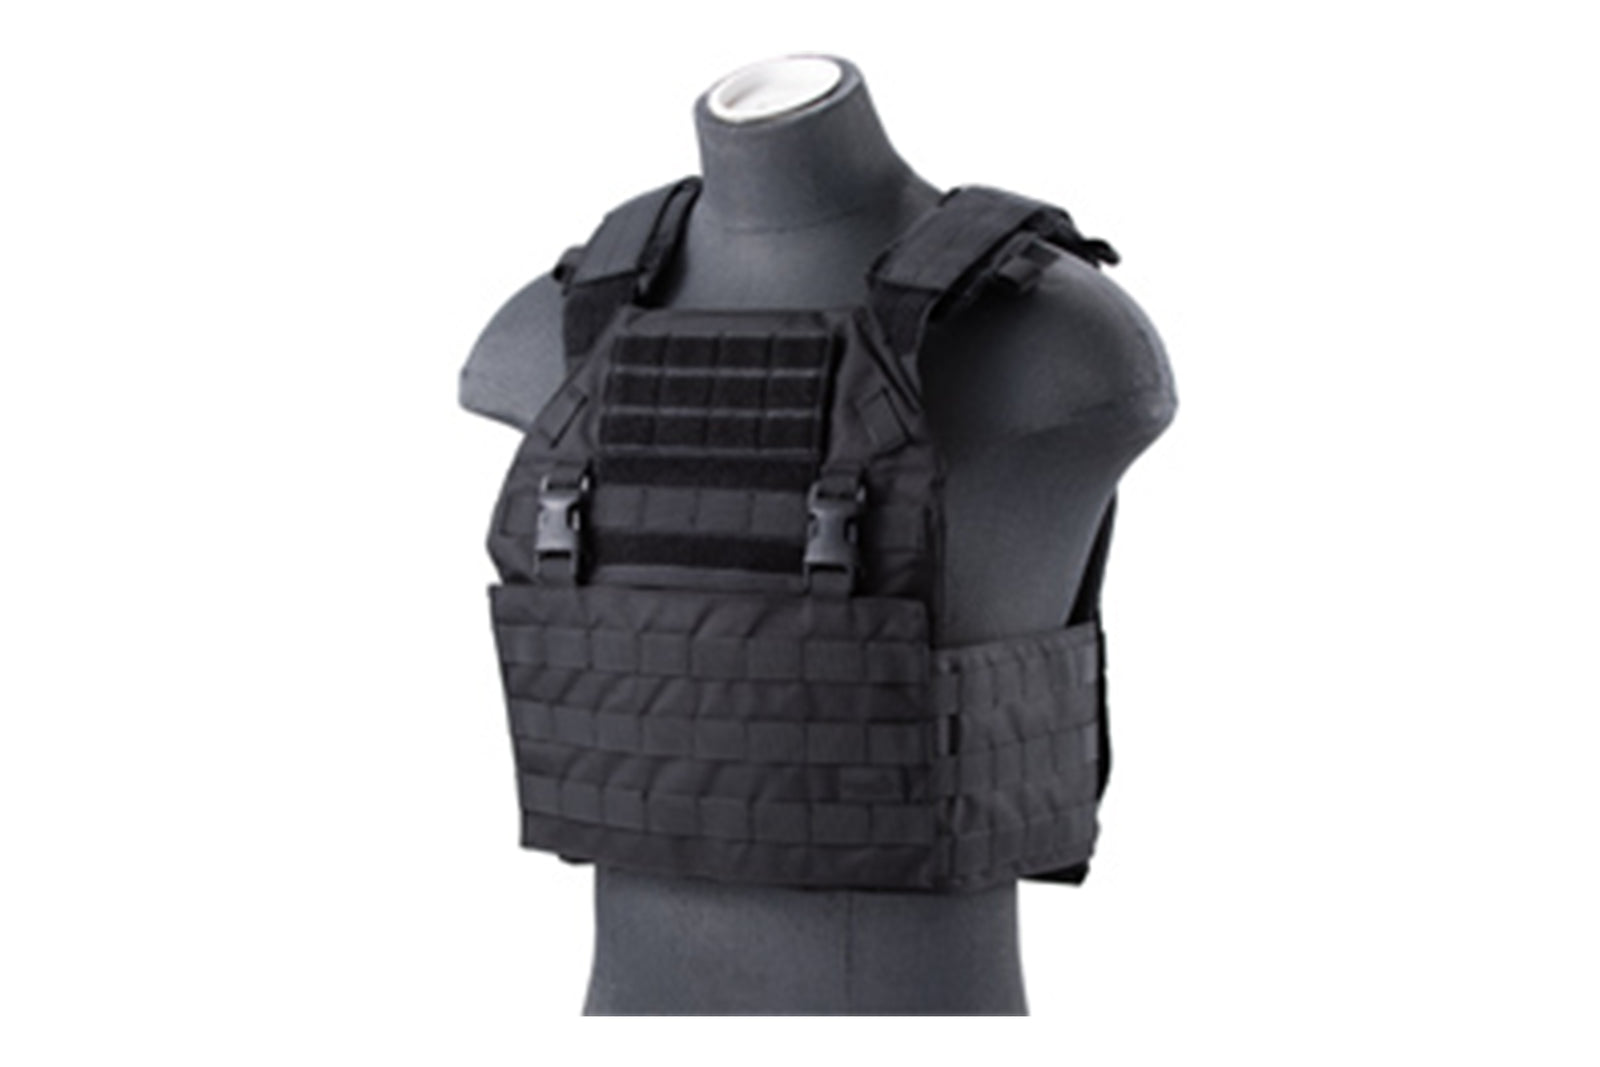 Lancer Tactical Vest with Molle Webbing and Detachable Buckles